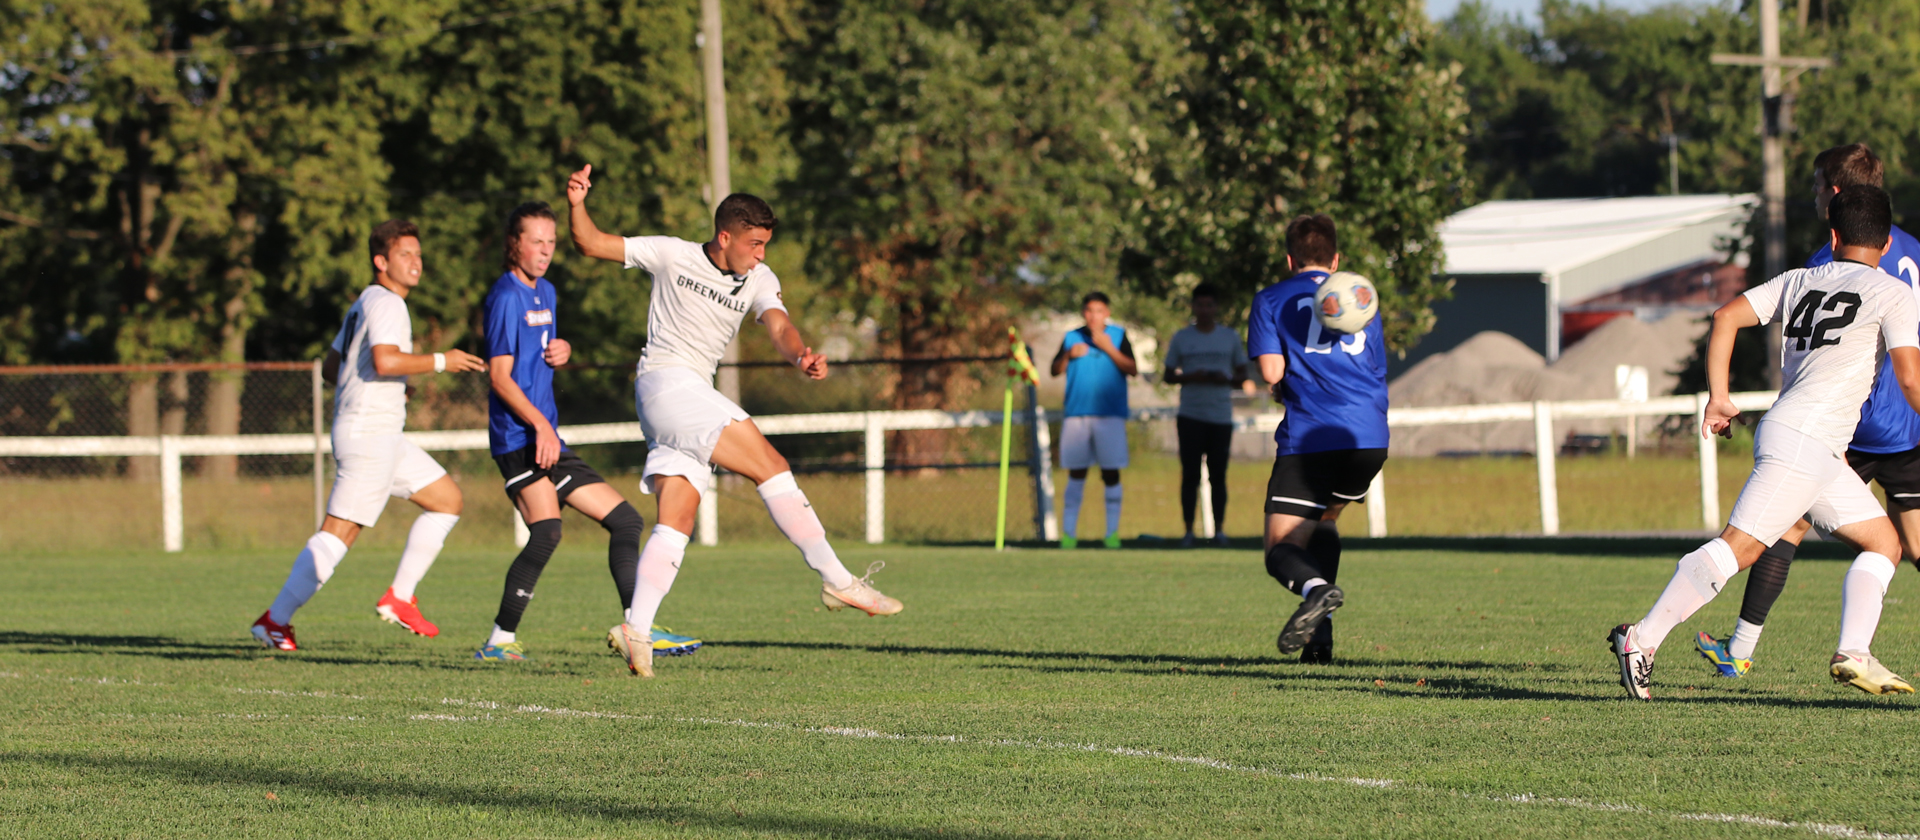 Men's soccer jumps in front in SLIAC with 2-0 win over Spalding